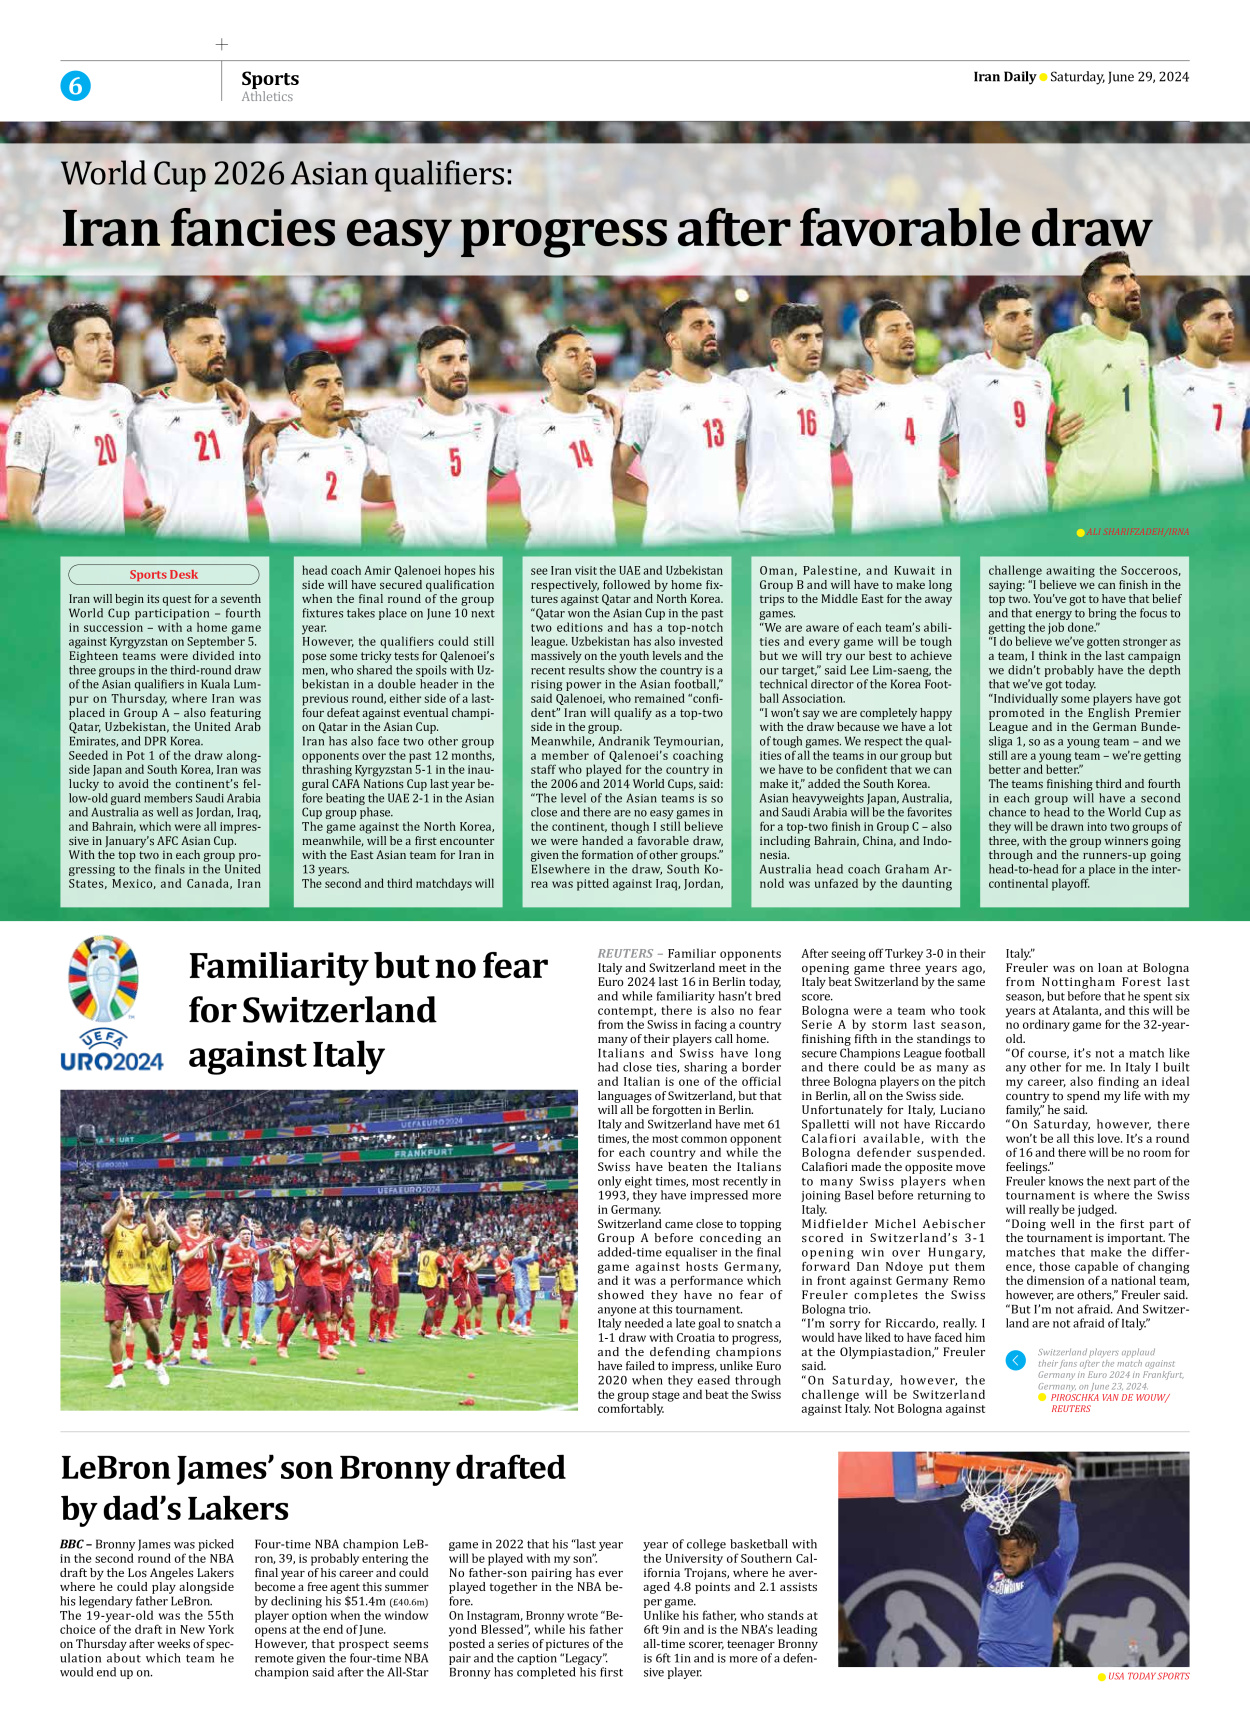 Iran Daily - Number Seven Thousand Five Hundred and Ninety One - 29 June 2024 - Page 6